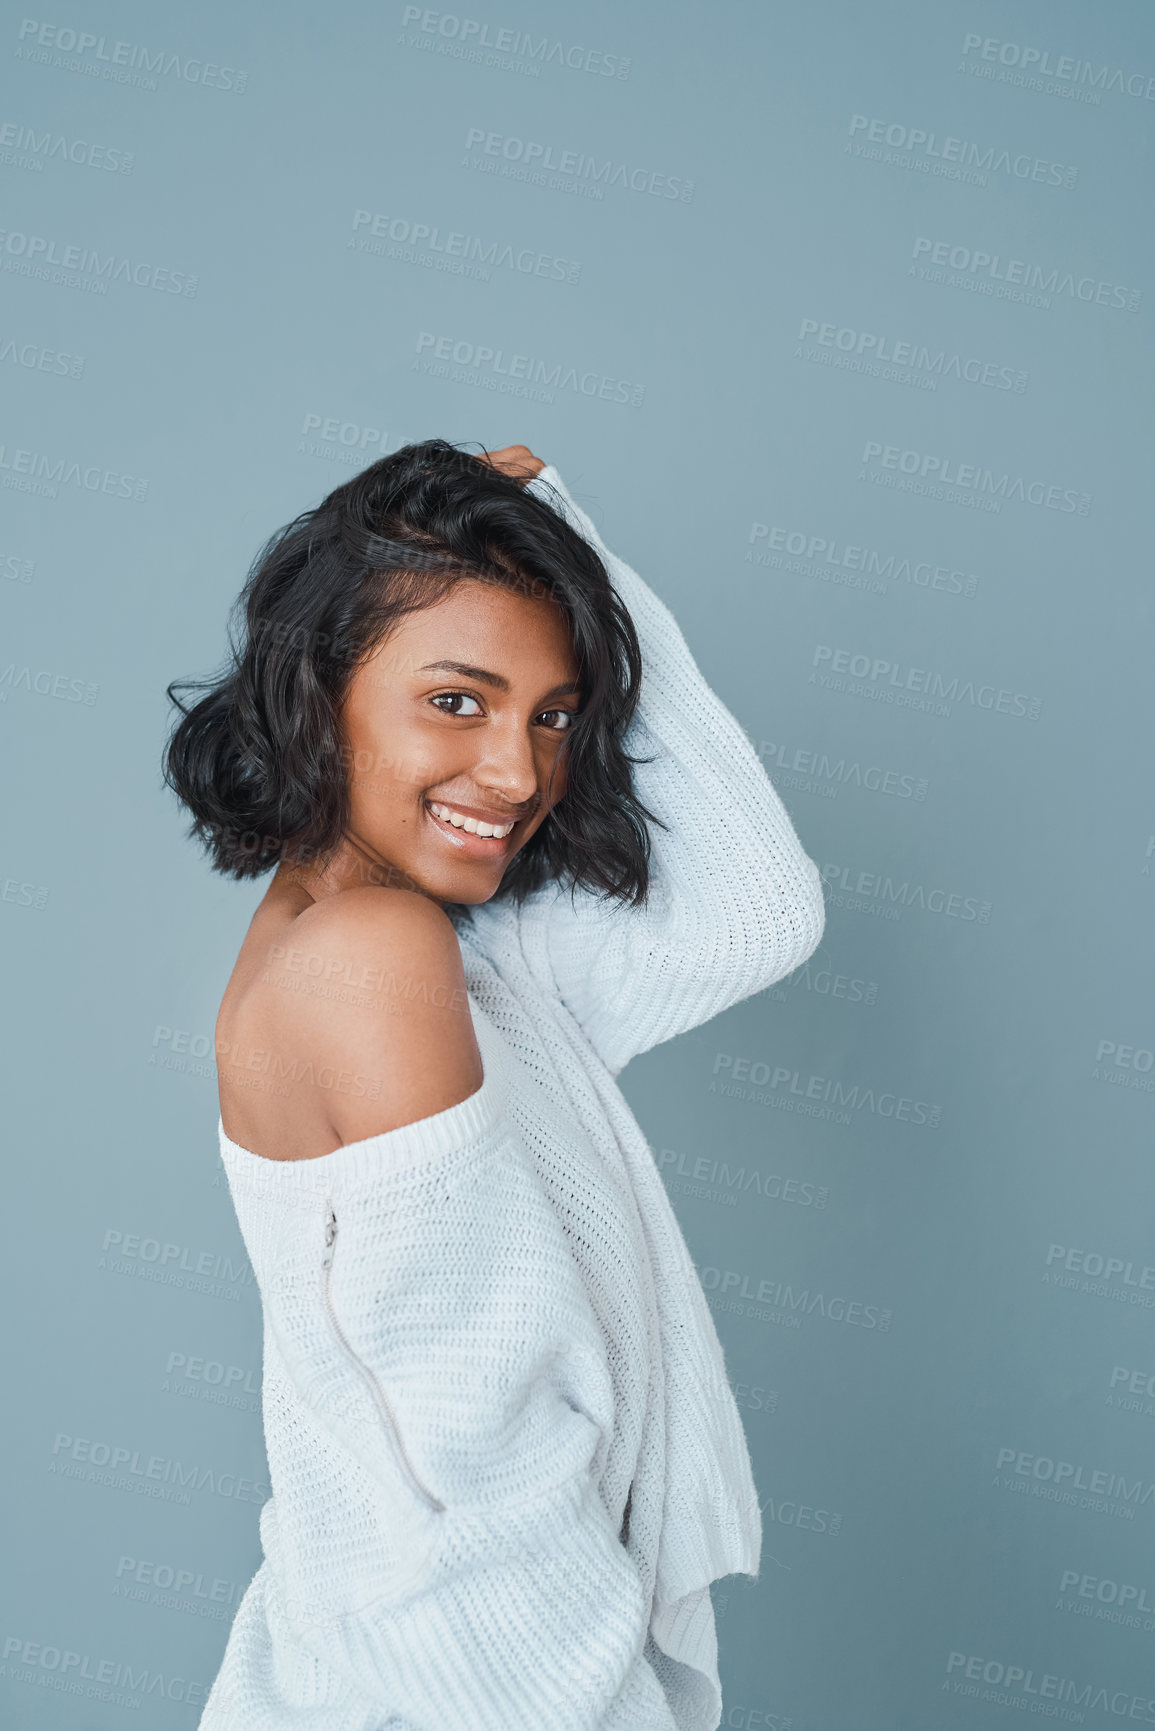 Buy stock photo Cropped shot of a beautiful young woman posing against a teal background